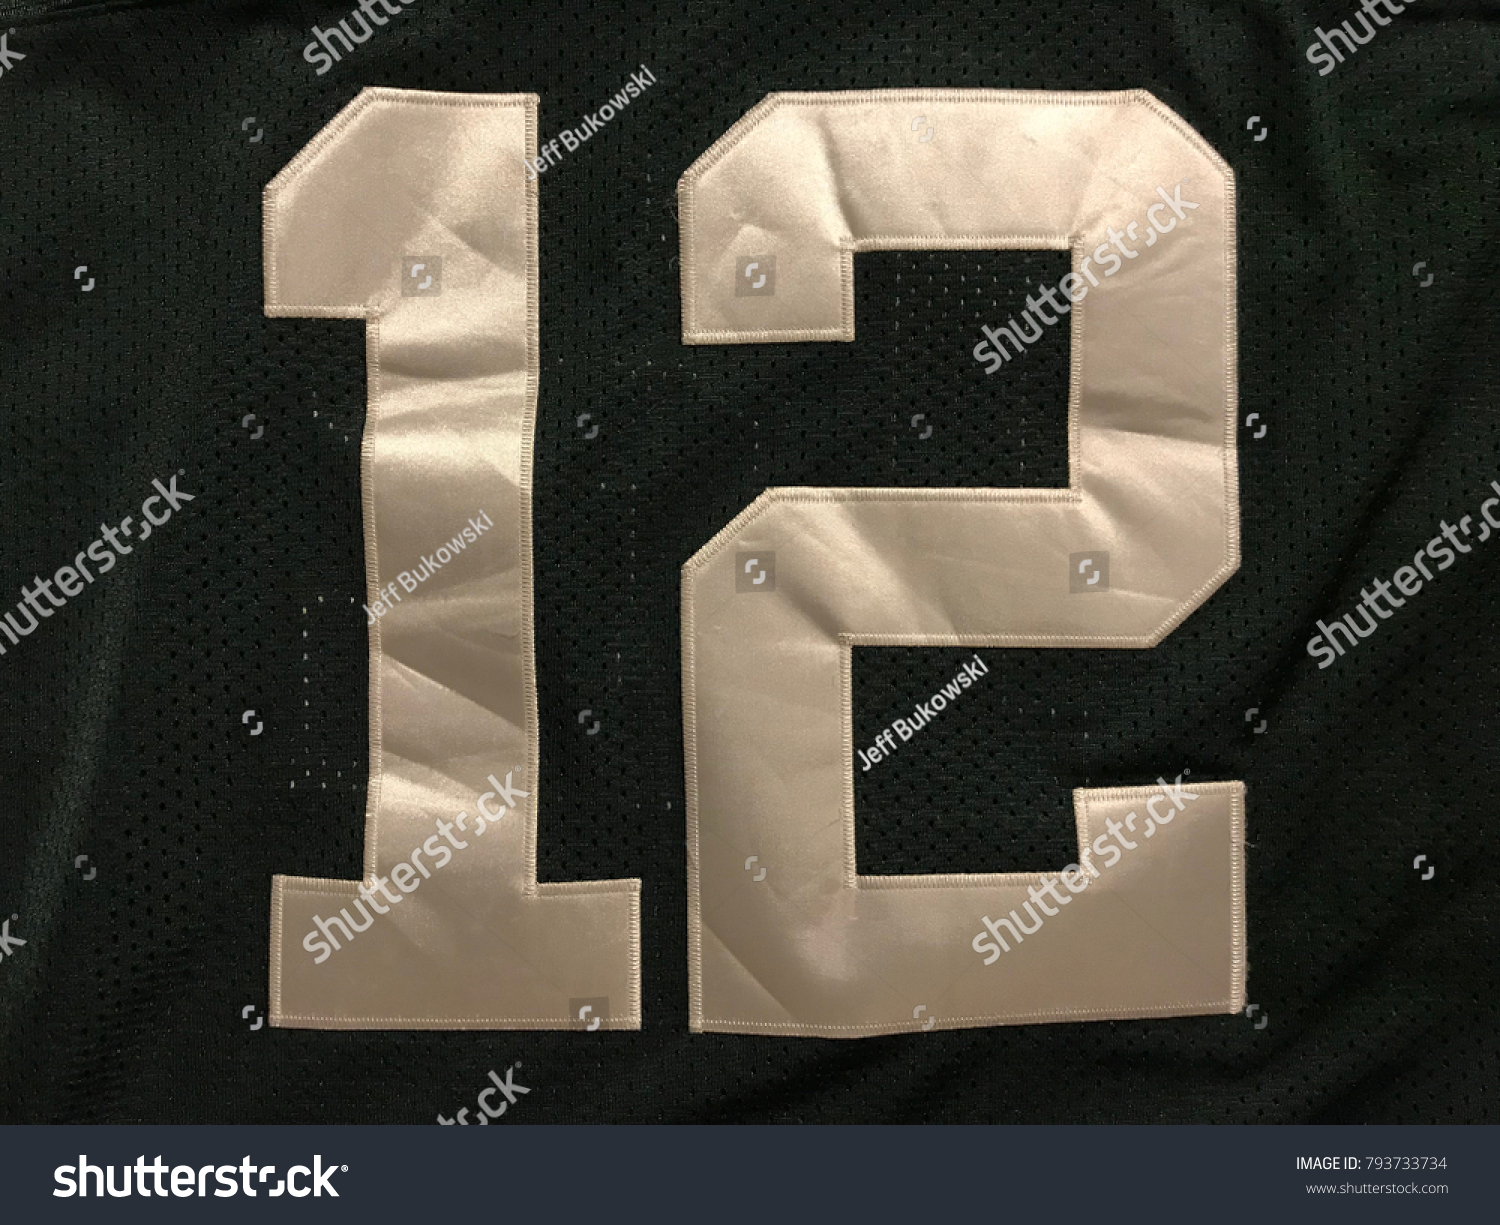 aaron rodgers super bowl jersey